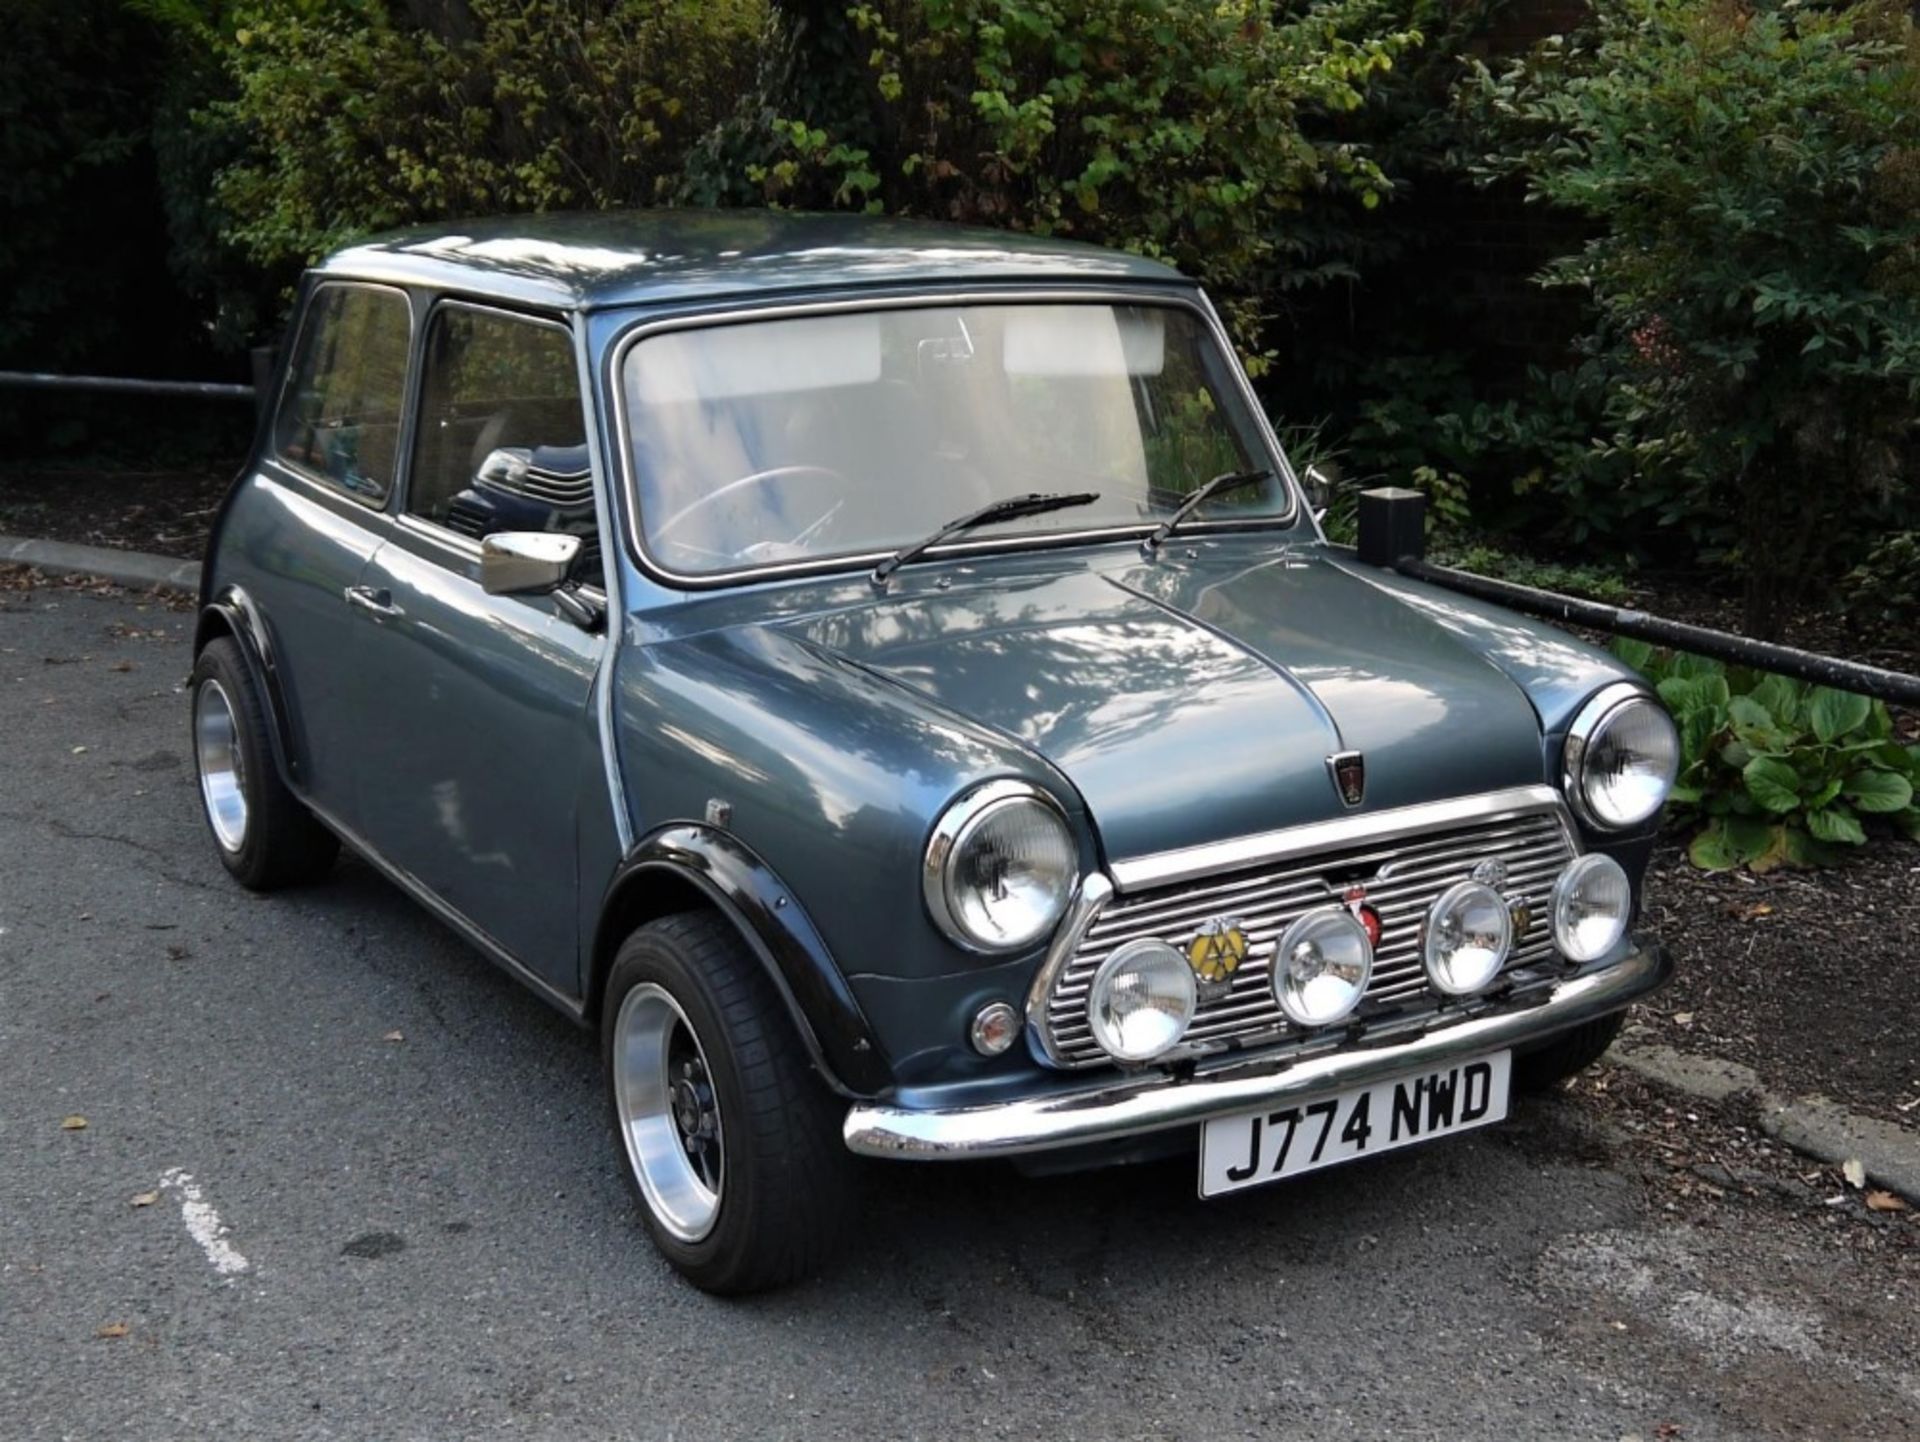 1991 ROVER MINI NEON Registration Number: J774 NWD Recorded Mileage: 58,000 miles Chassis Number: - Bild 13 aus 24